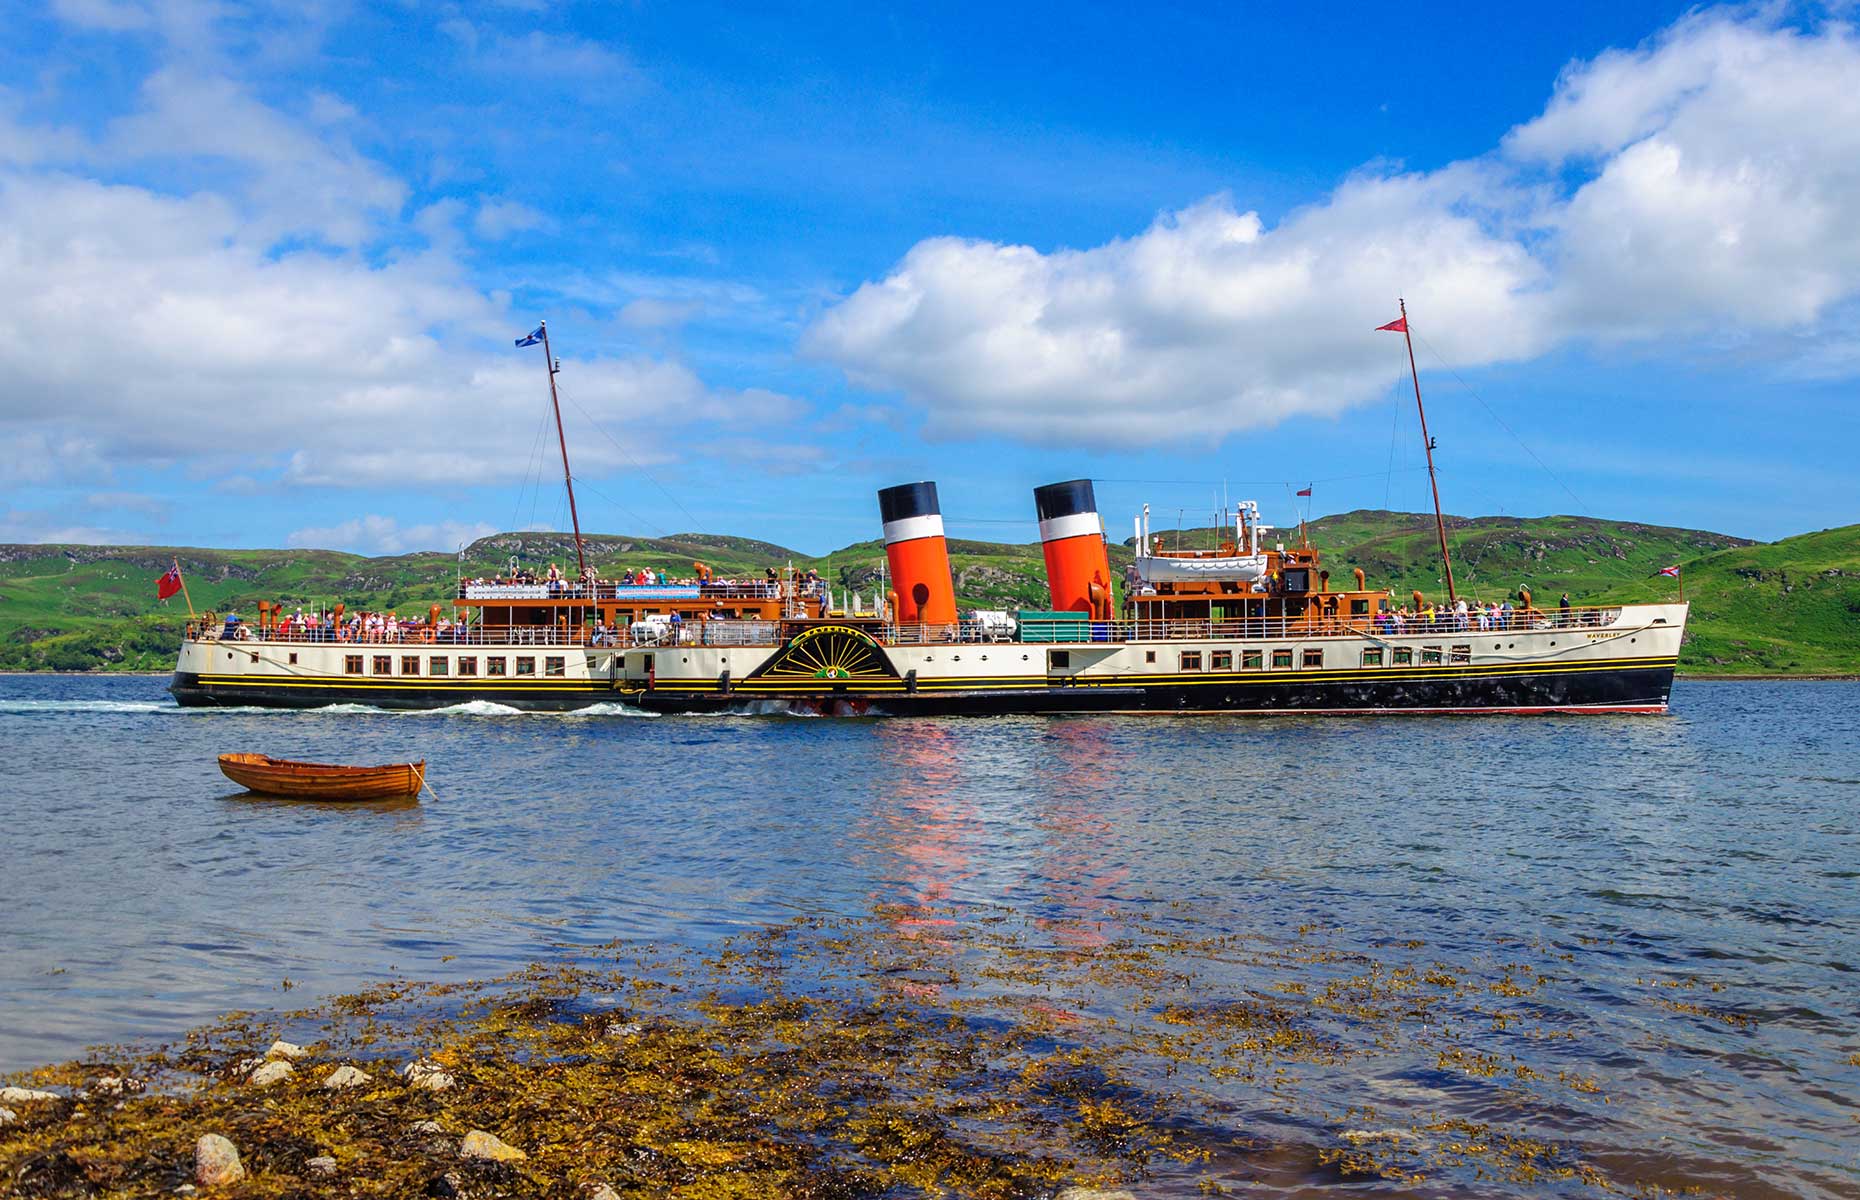 Waverley paddle steam with Isle of Bute in the background (Image: Skully/Shutterstock)